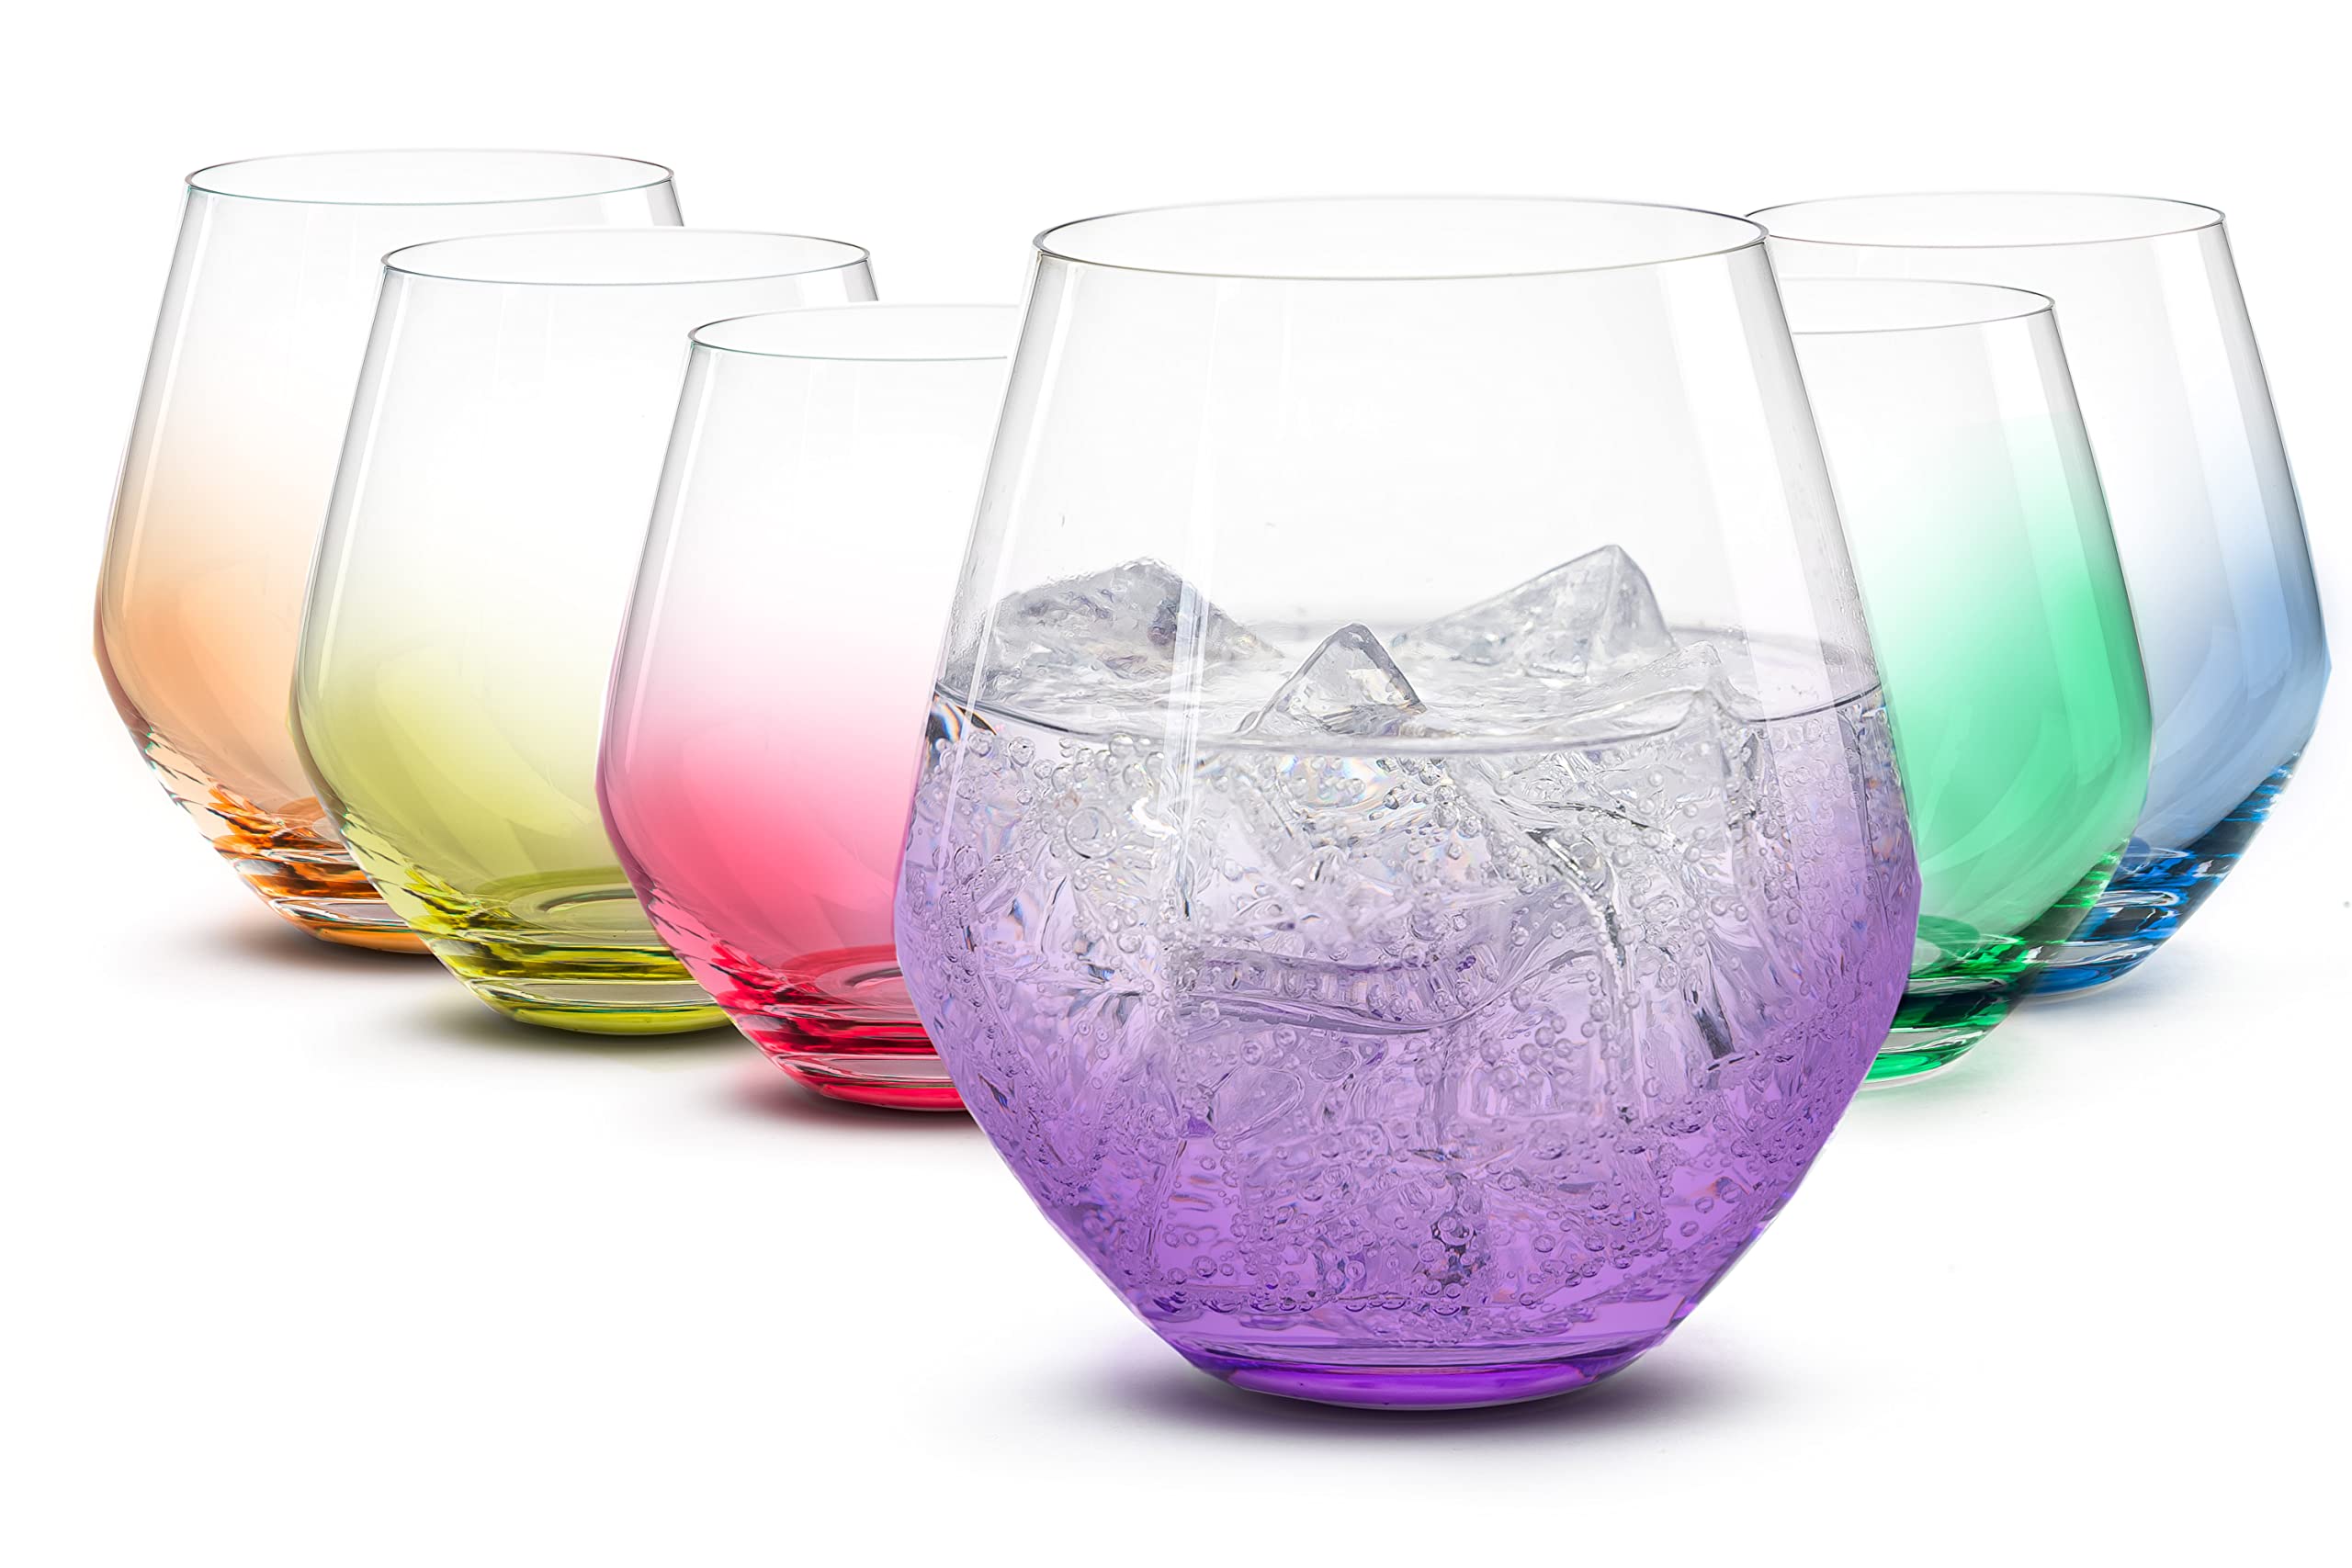 BENETI Premium Stemless Wine Glass | 18oz European Made Colored Stemless Wine Glasses set 6 | Crystal Glass Durable Drinking Cups for Parties  - Good